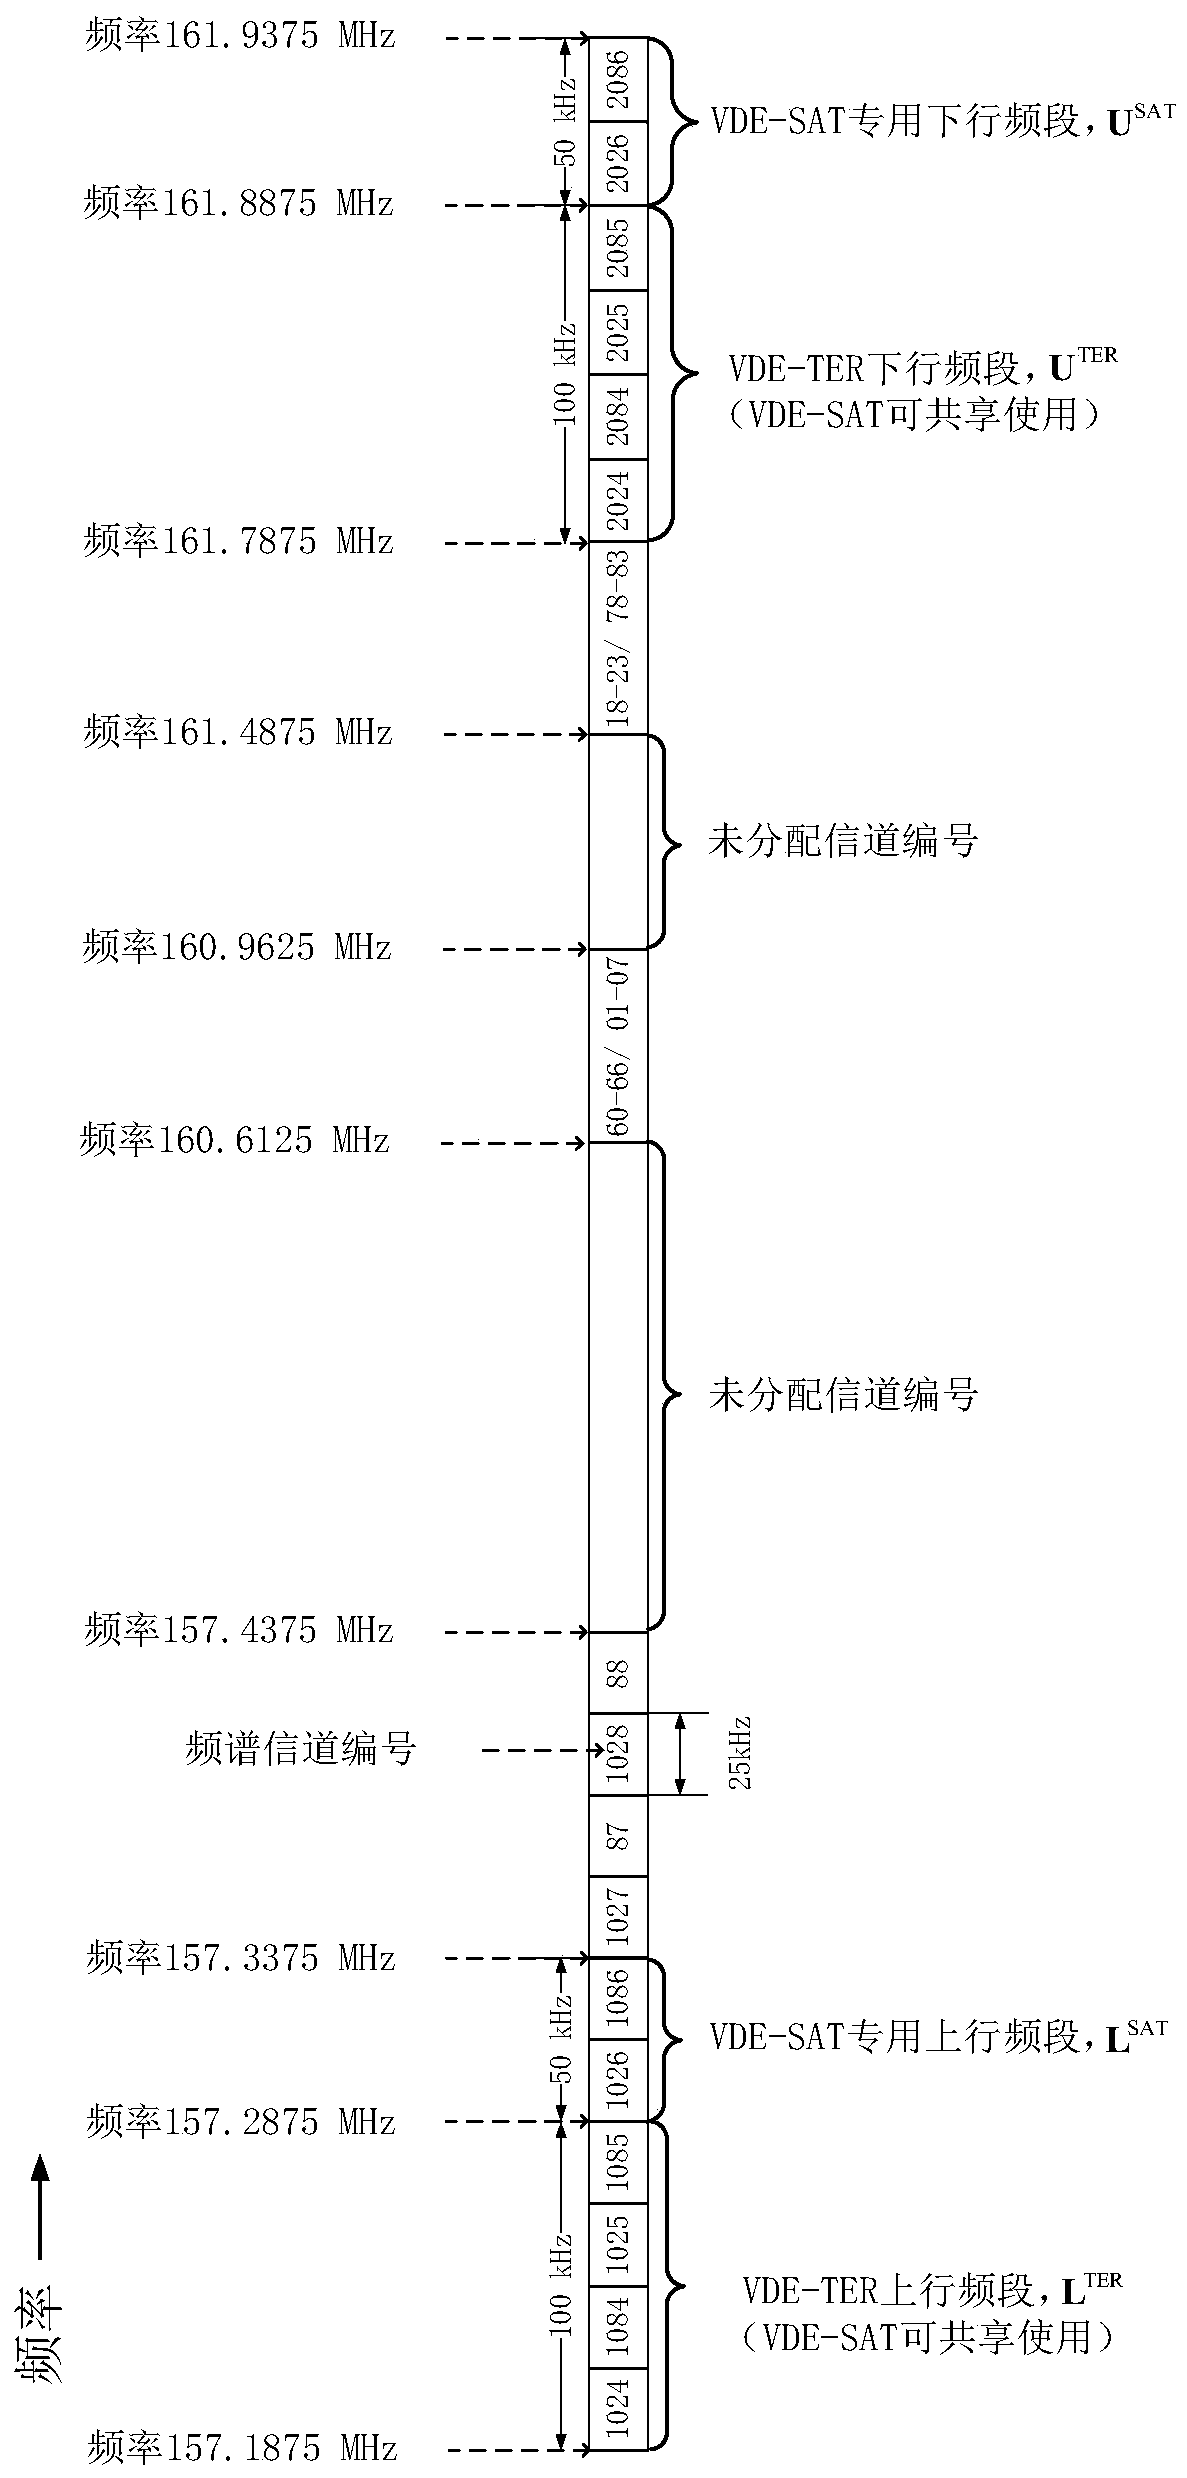 Frequency spectrum sharing method for satellite communication and ground communication